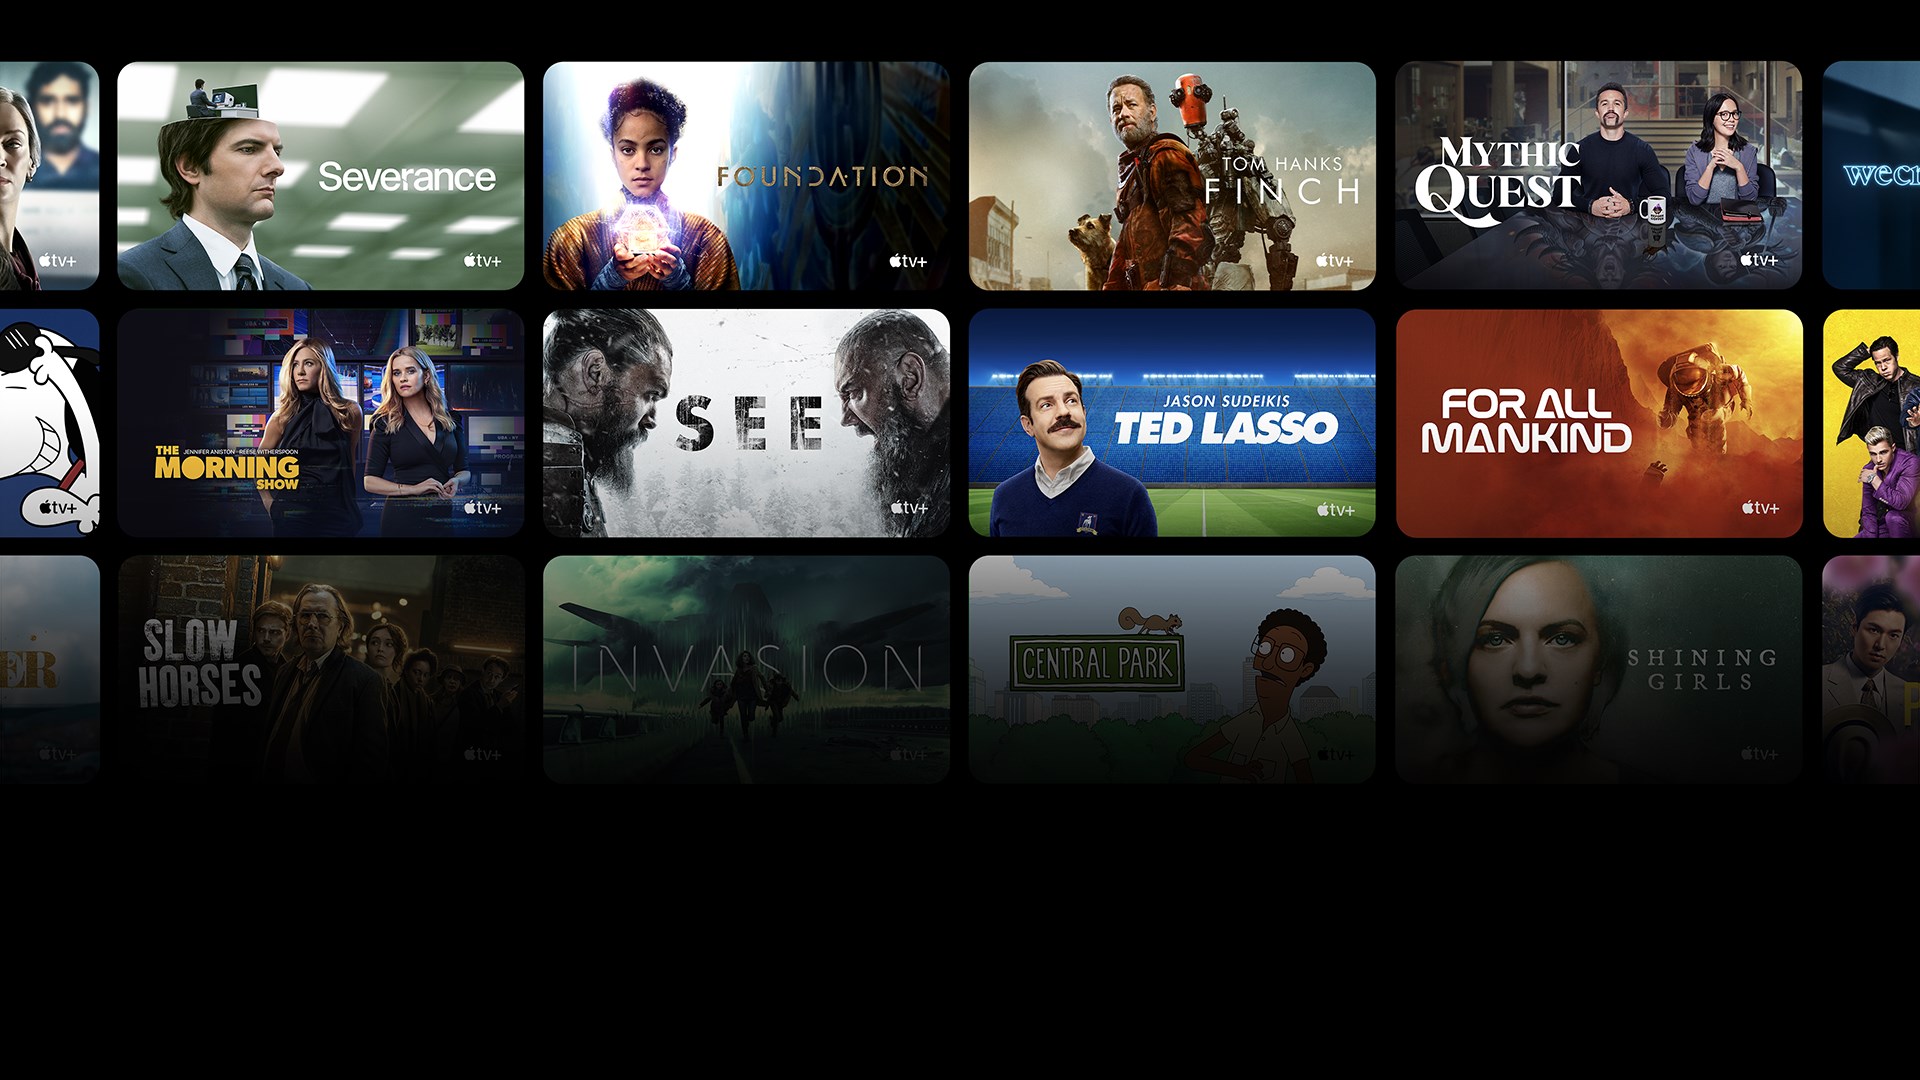 2 Ways to Watch iTunes Movies TV shows on Xbox 360/Xbox One